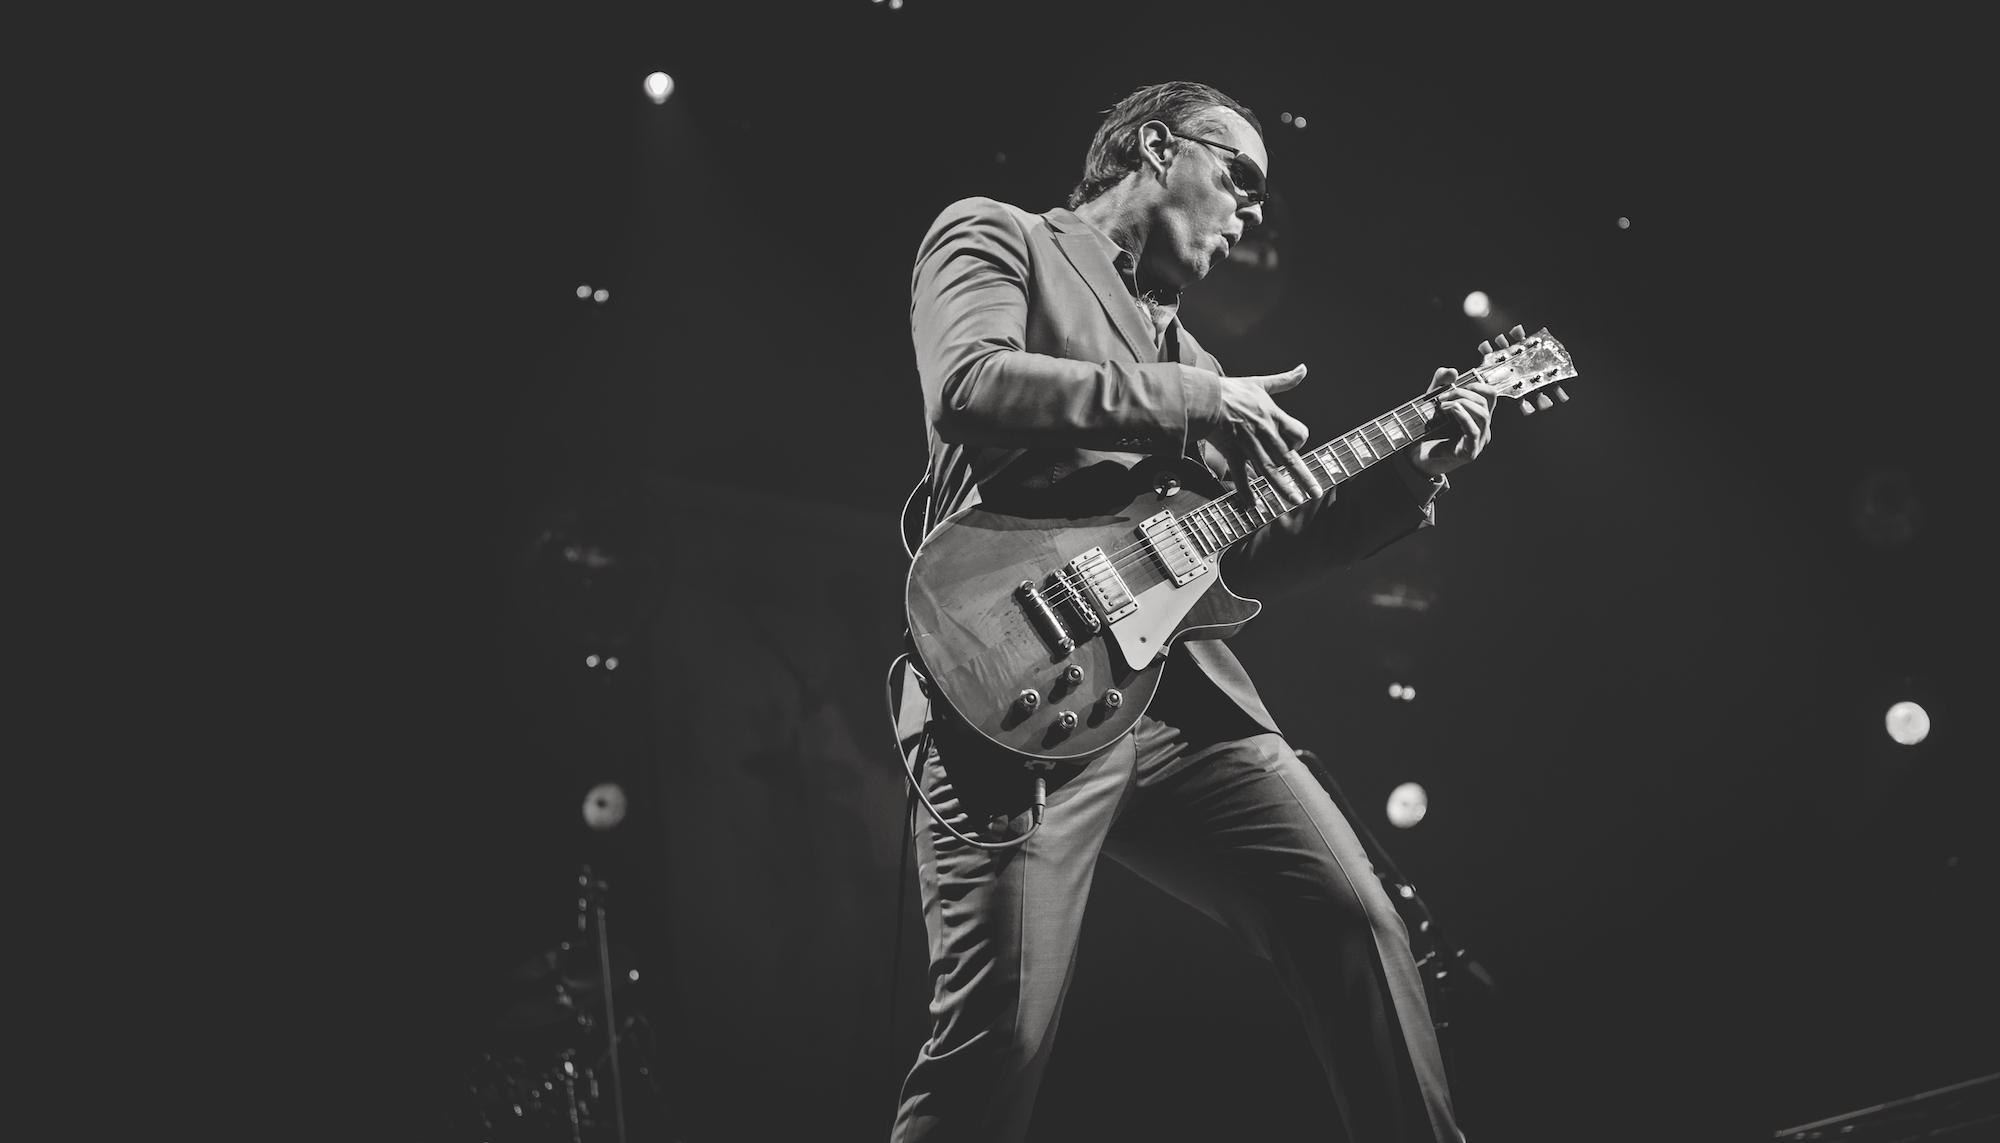 Joe bonamassa this was the hardest thing for me to get the hang of on guitar